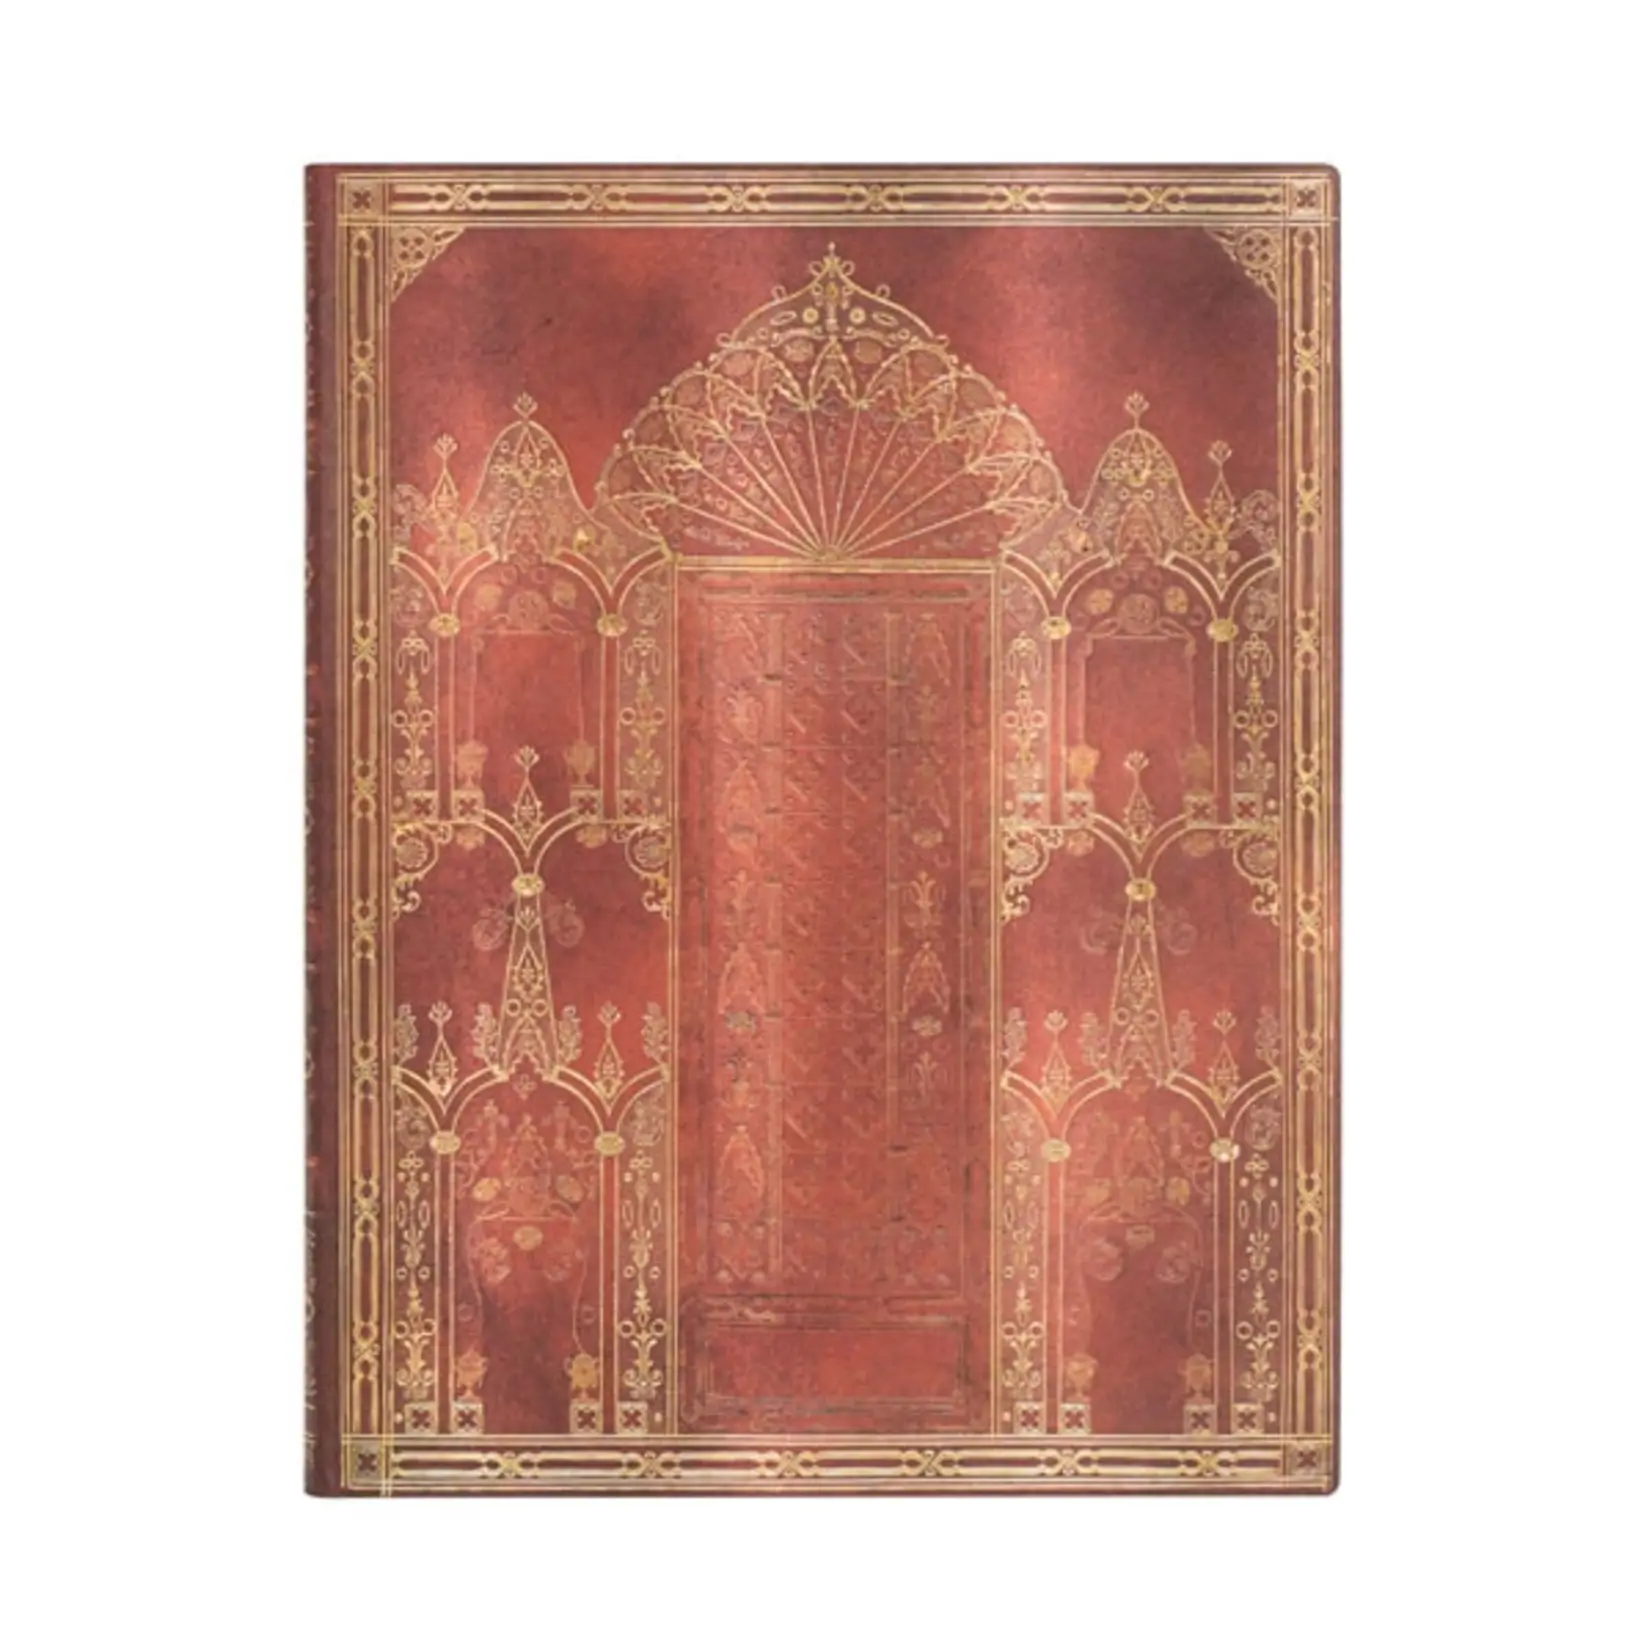 Paperblanks Journals Gothic Revival ultra lined